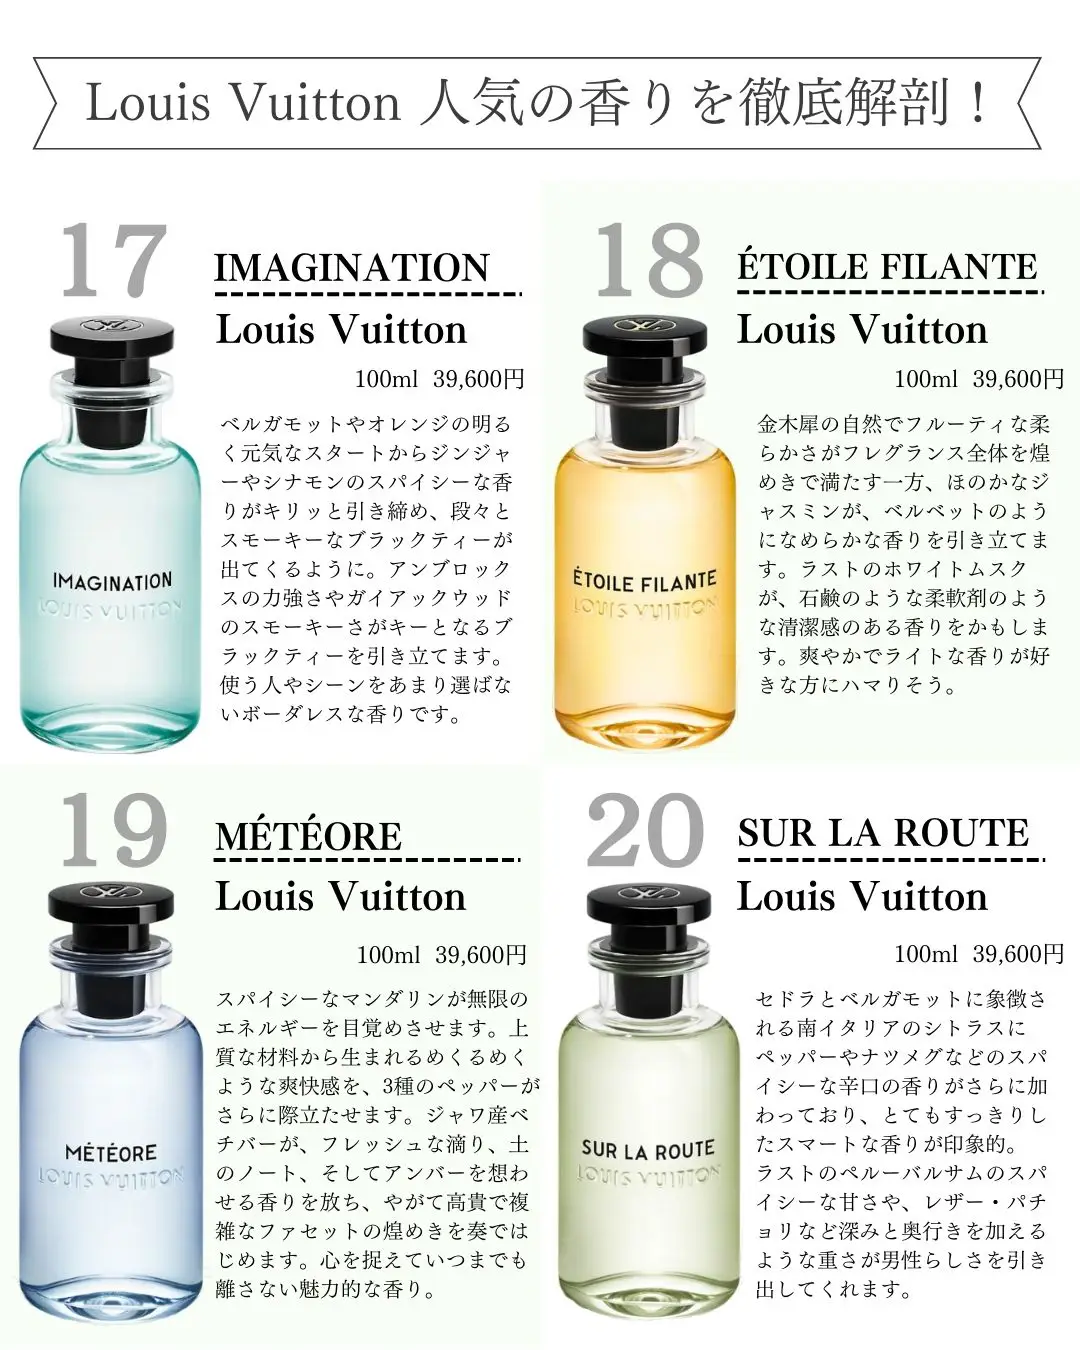 Louis Vuitton Cologne Discovery Set - Meteore